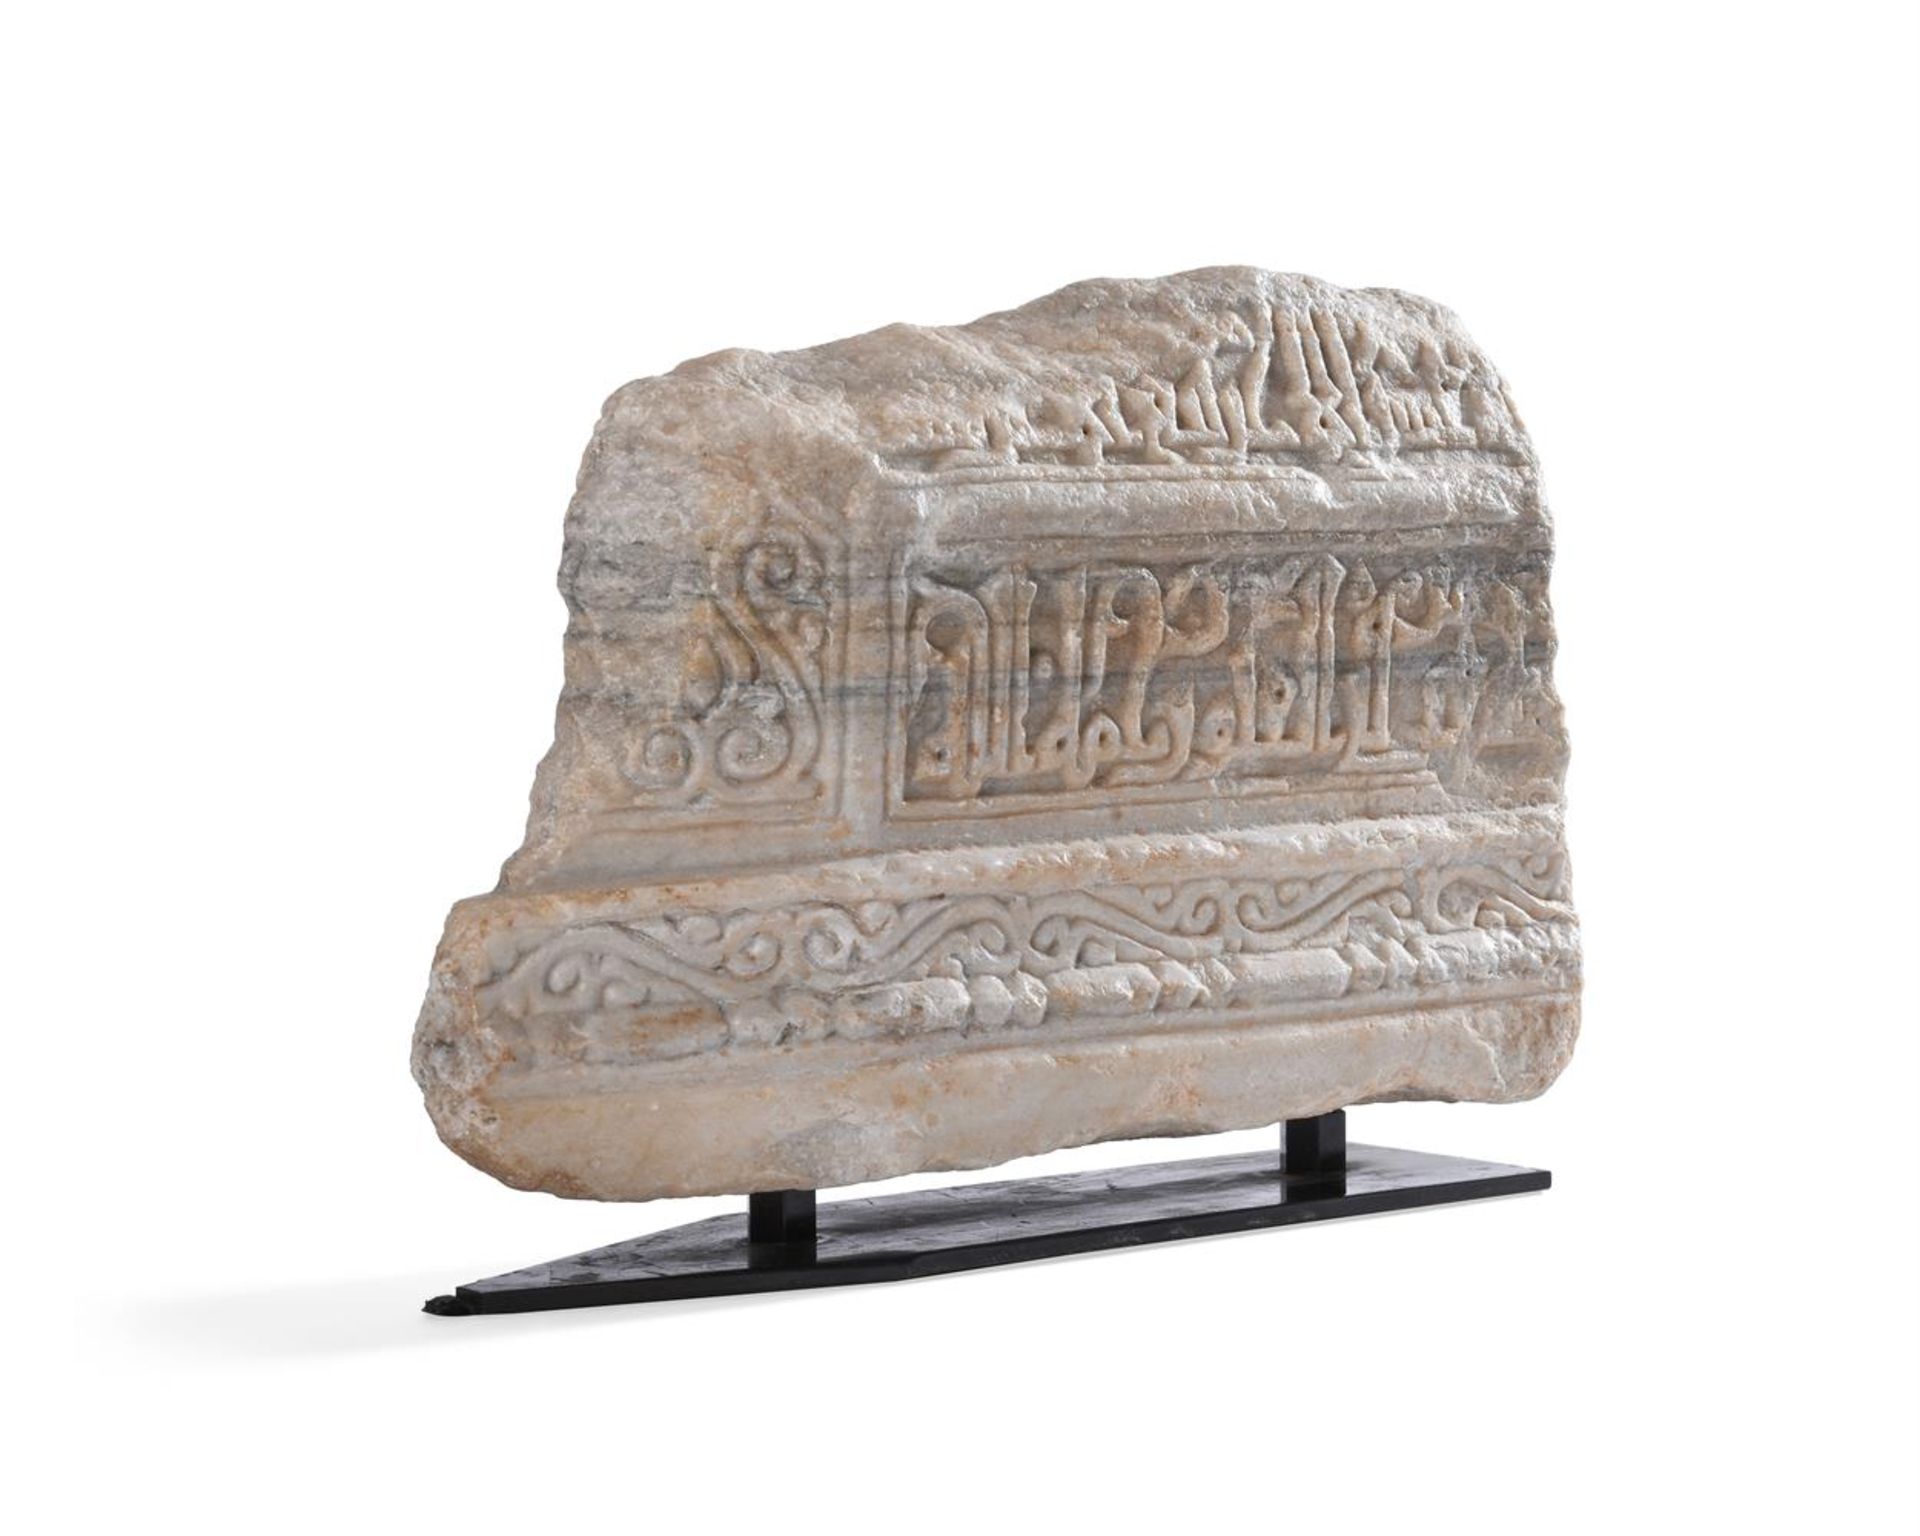 A FRAGMENTARY MARBLE FUNERARY MONUMENT NORTH AFRICA